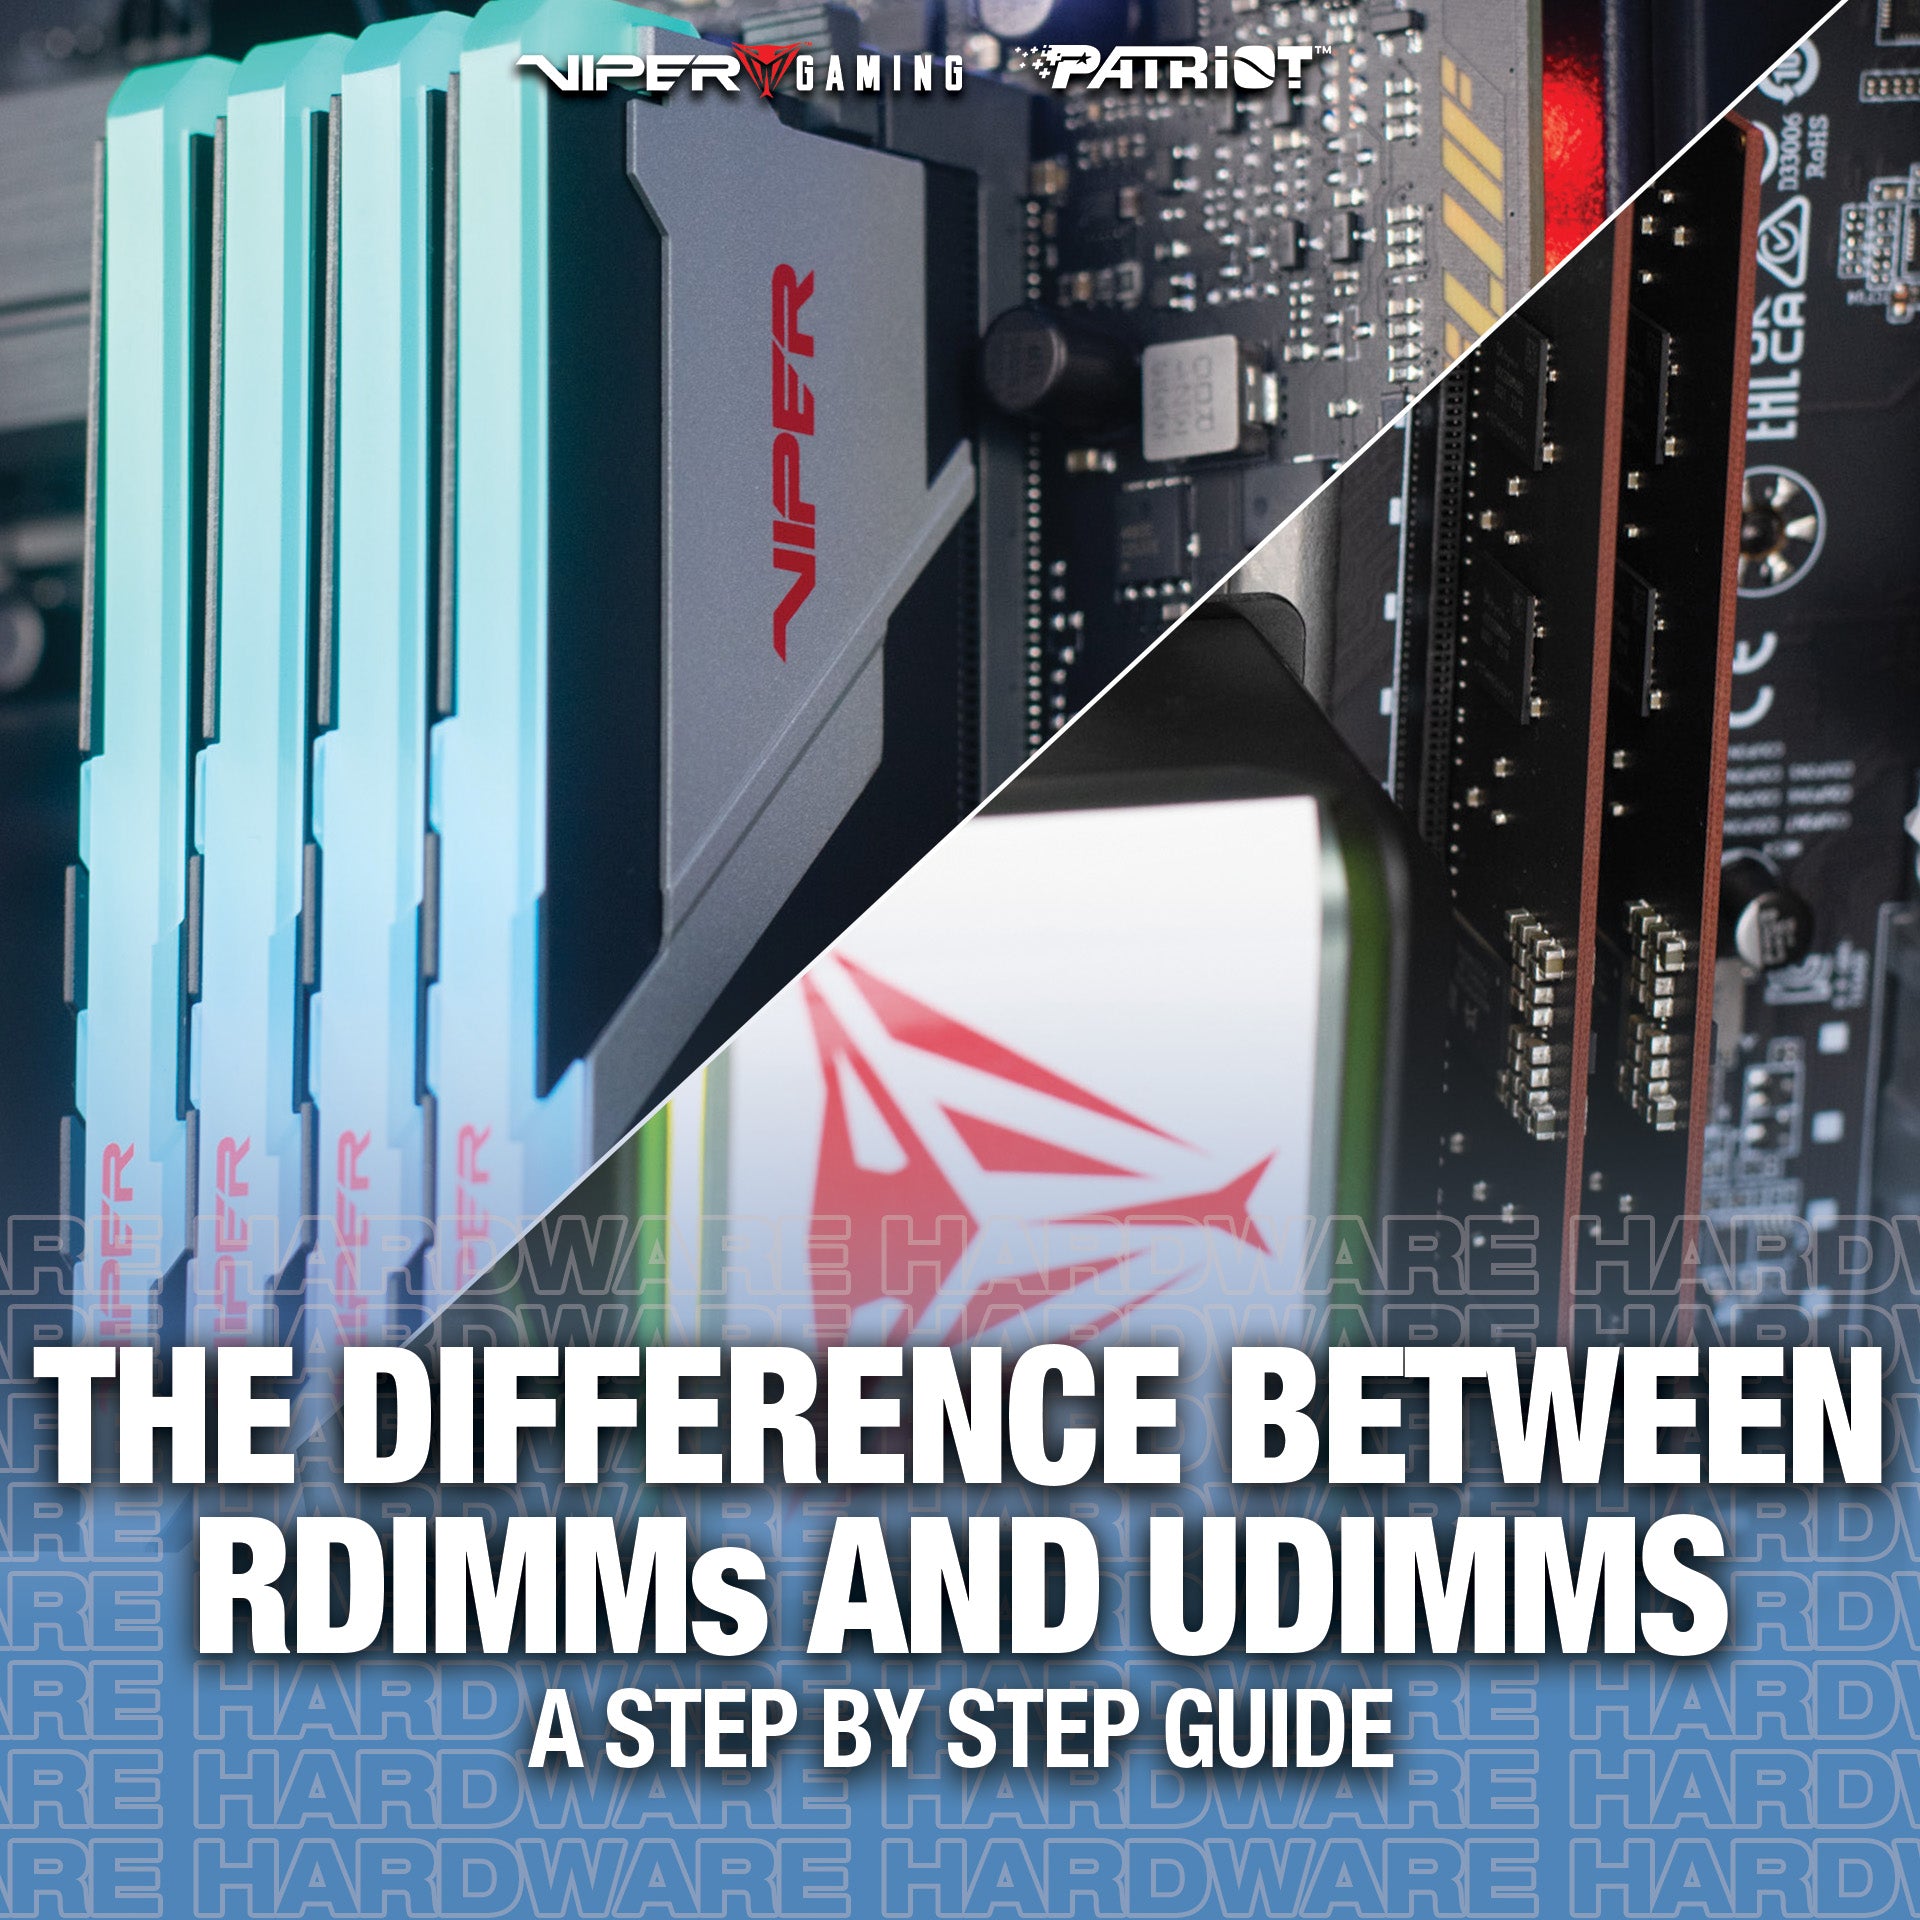 What's the Difference between UDIMMs and RDIMMs?